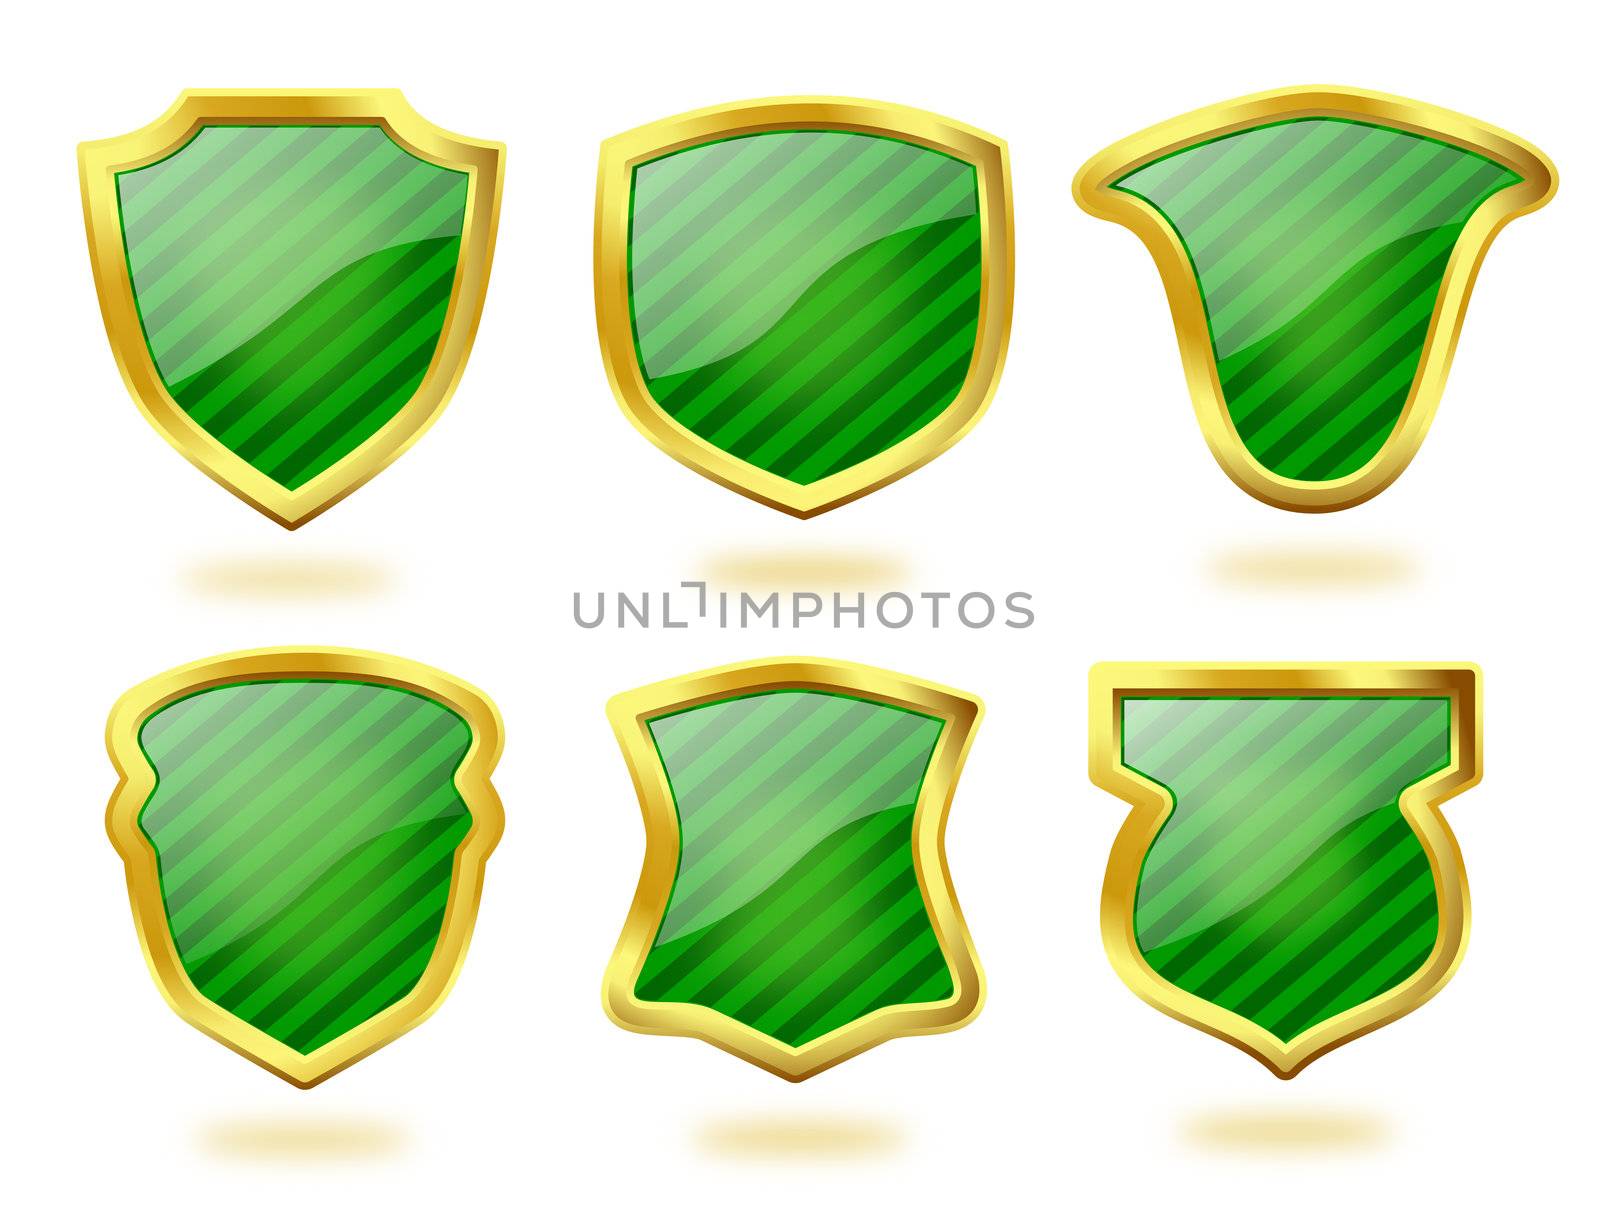 Striped Green Shields with Golden Frame by RichieThakur